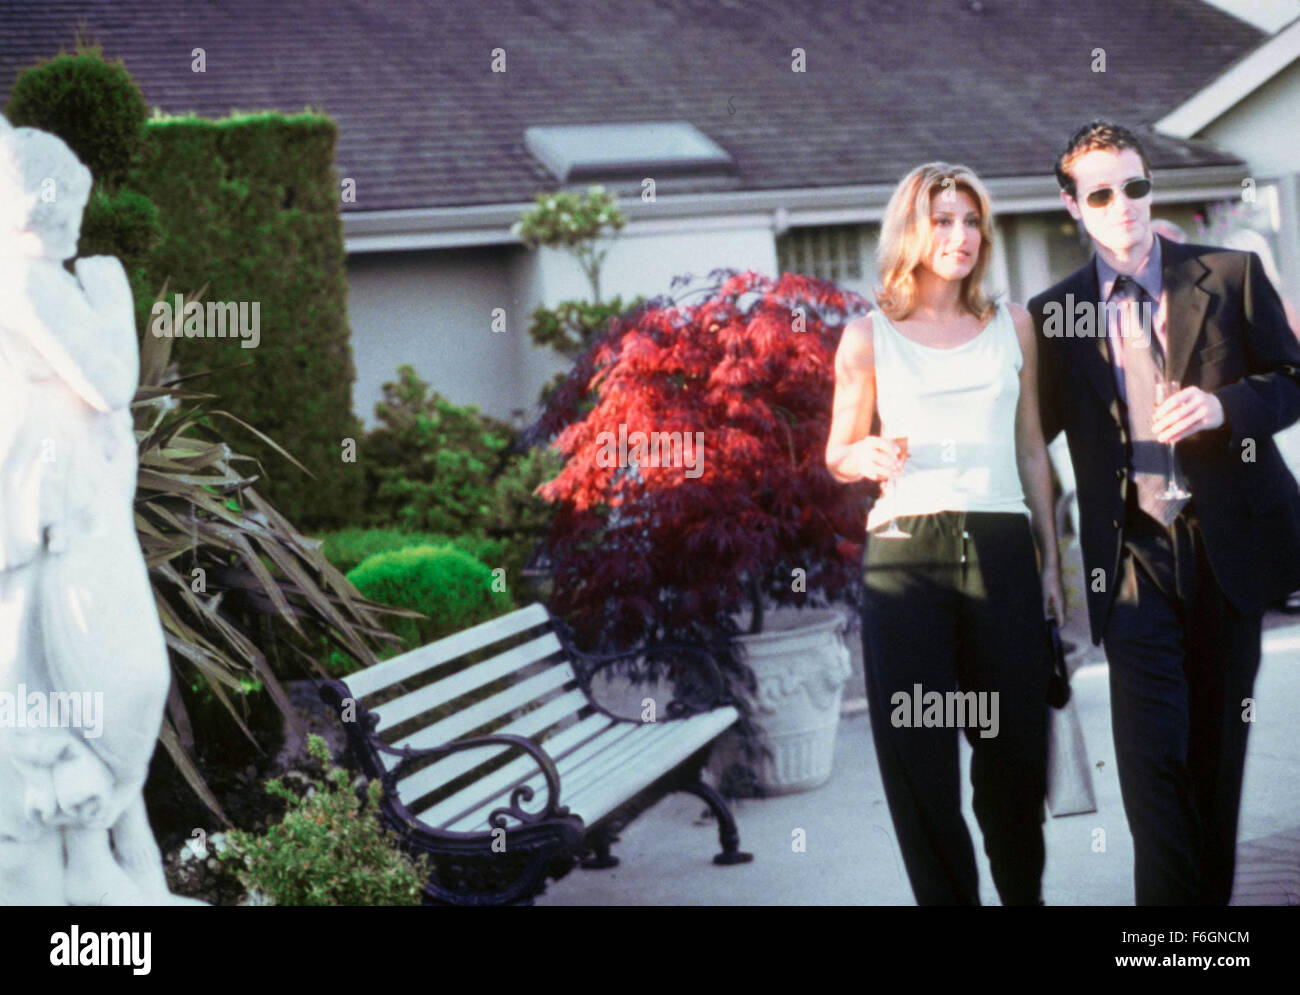 Jan 08, 2001; Hollywood, CA, USA; NICK MORAN as Terry Martin and JENNIFER ESPOSITO as Susan Reese in the thriller drama ''The Proposal'' directed by Richard Gale. Stock Photo